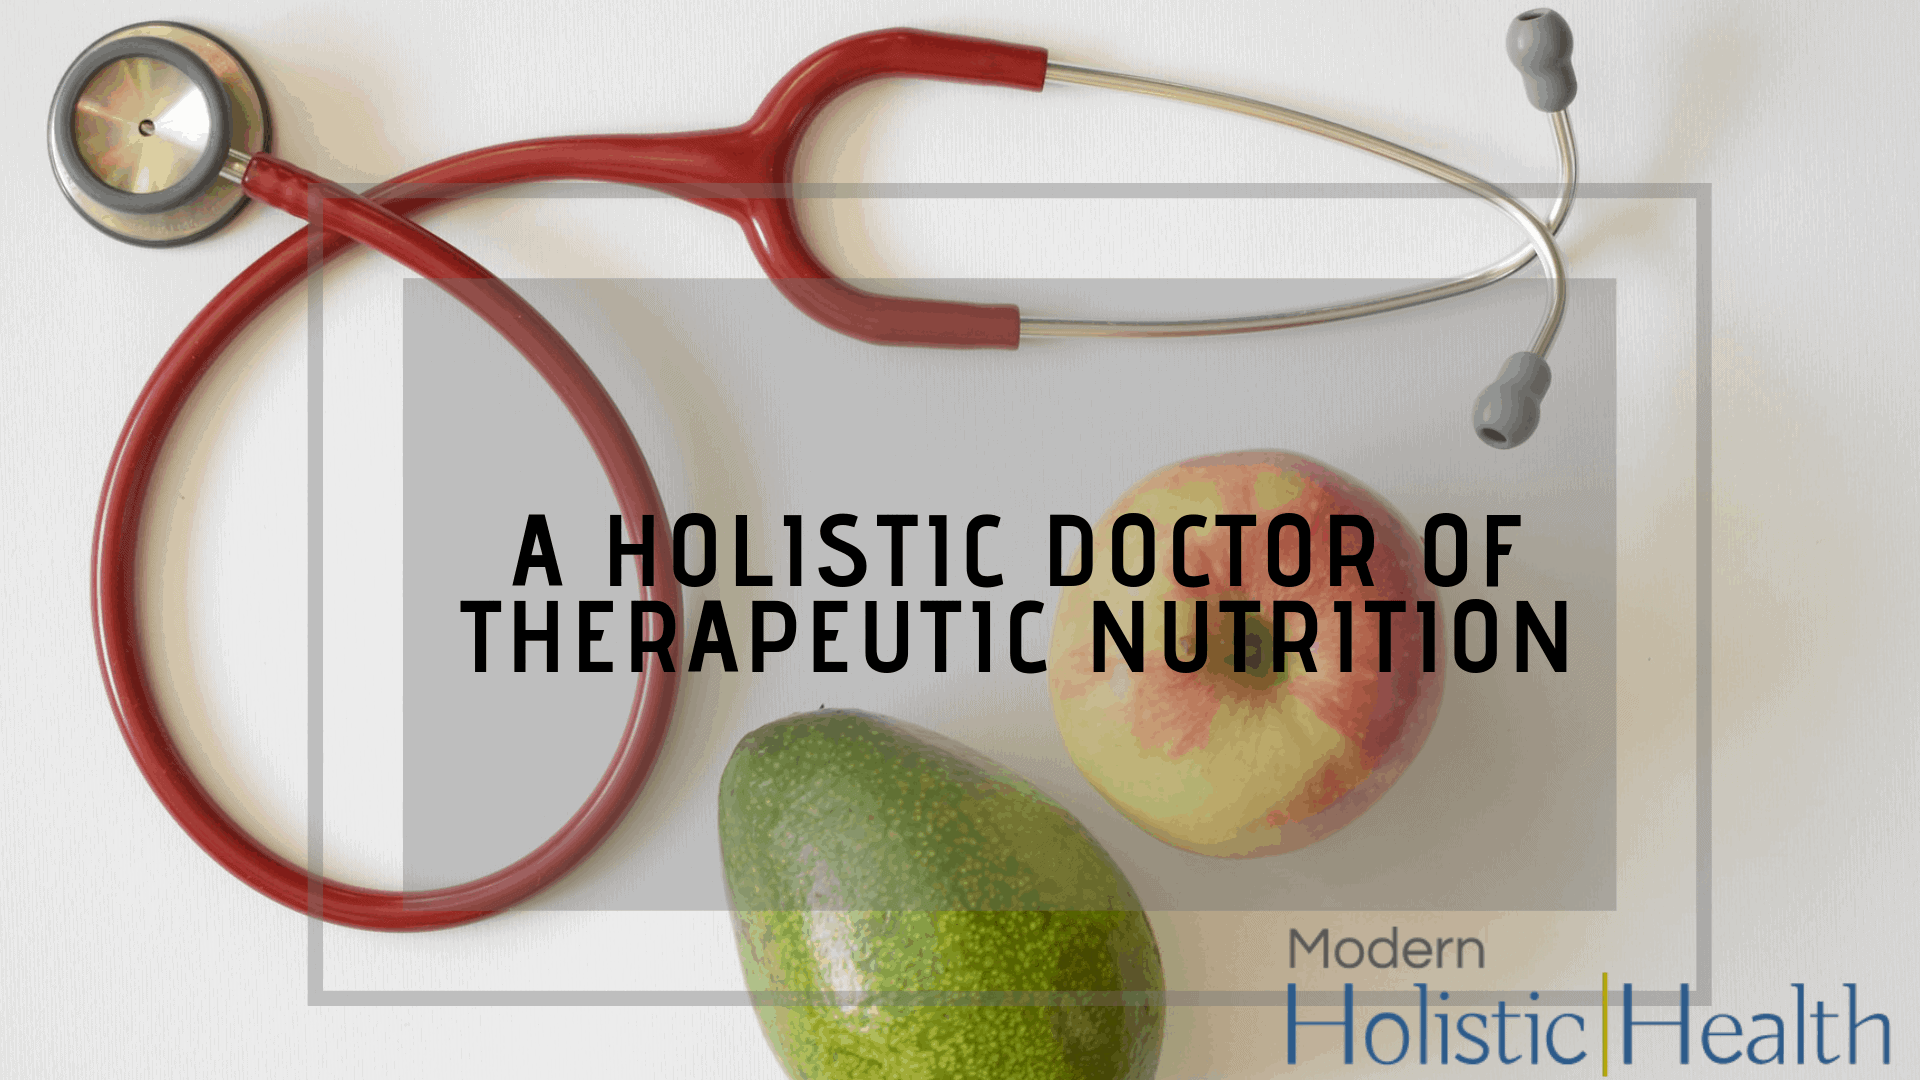 Holistic Doctor of Therapeutic Nutrition